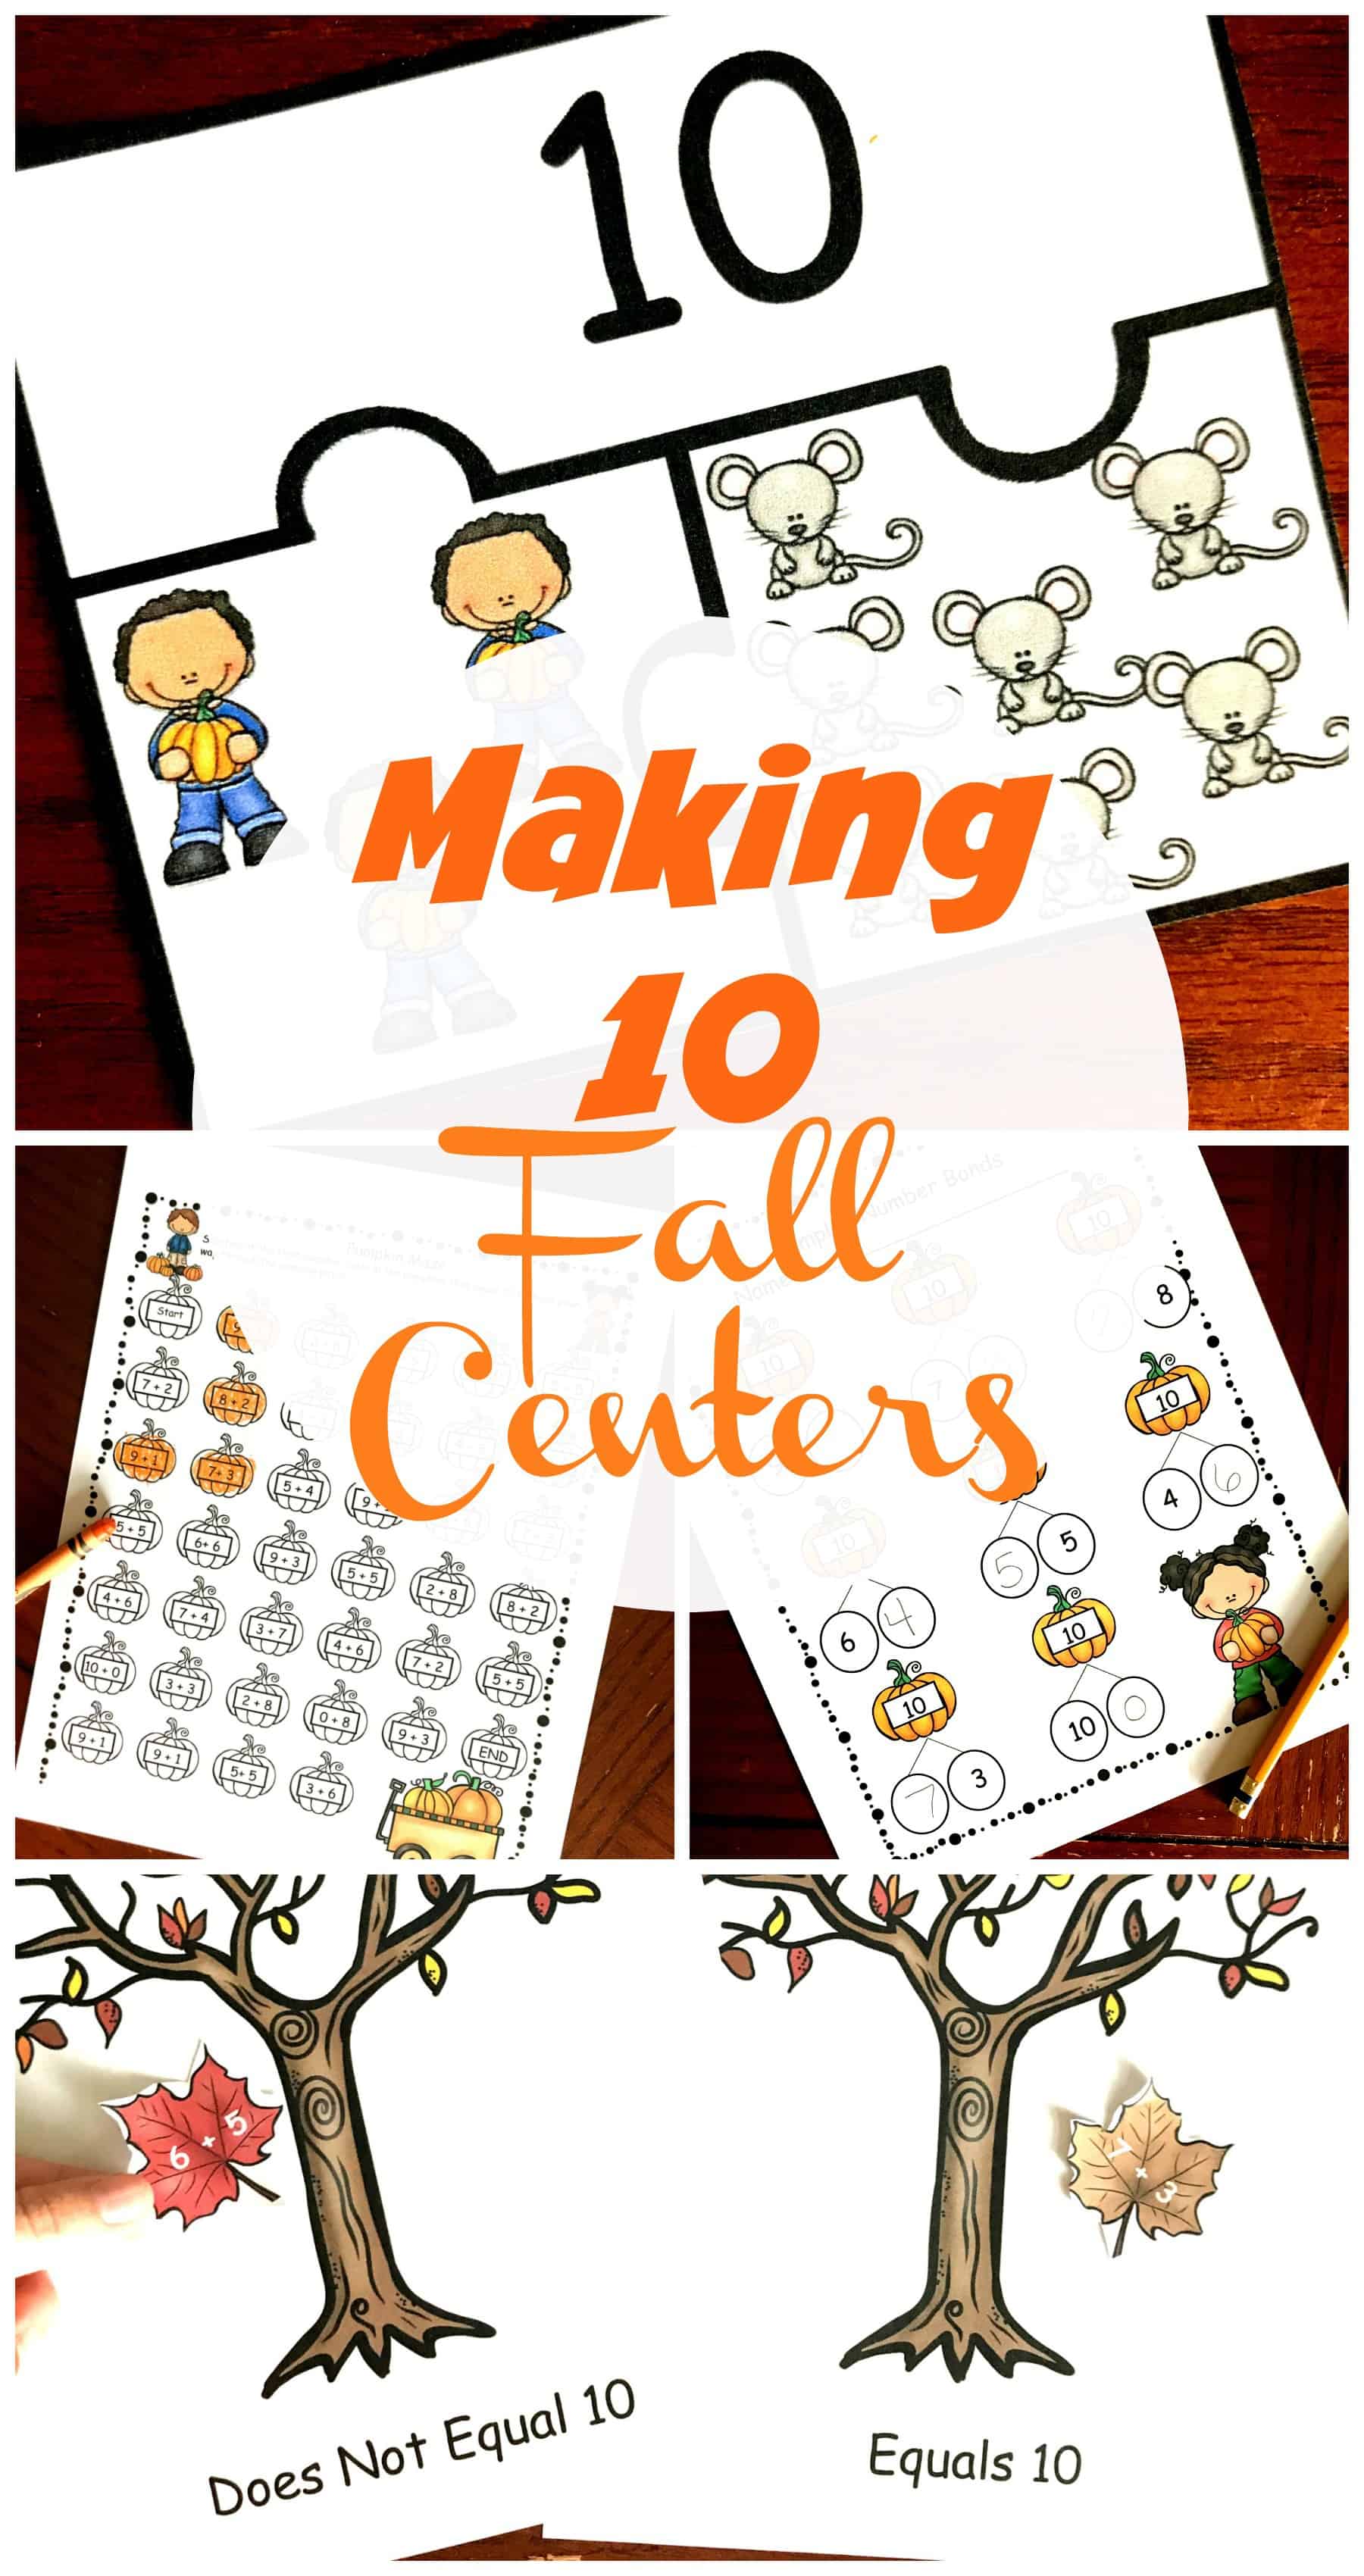 Want to help your students master making 10? Check out these engaging fall activities designed to help your students explore adding to 10.